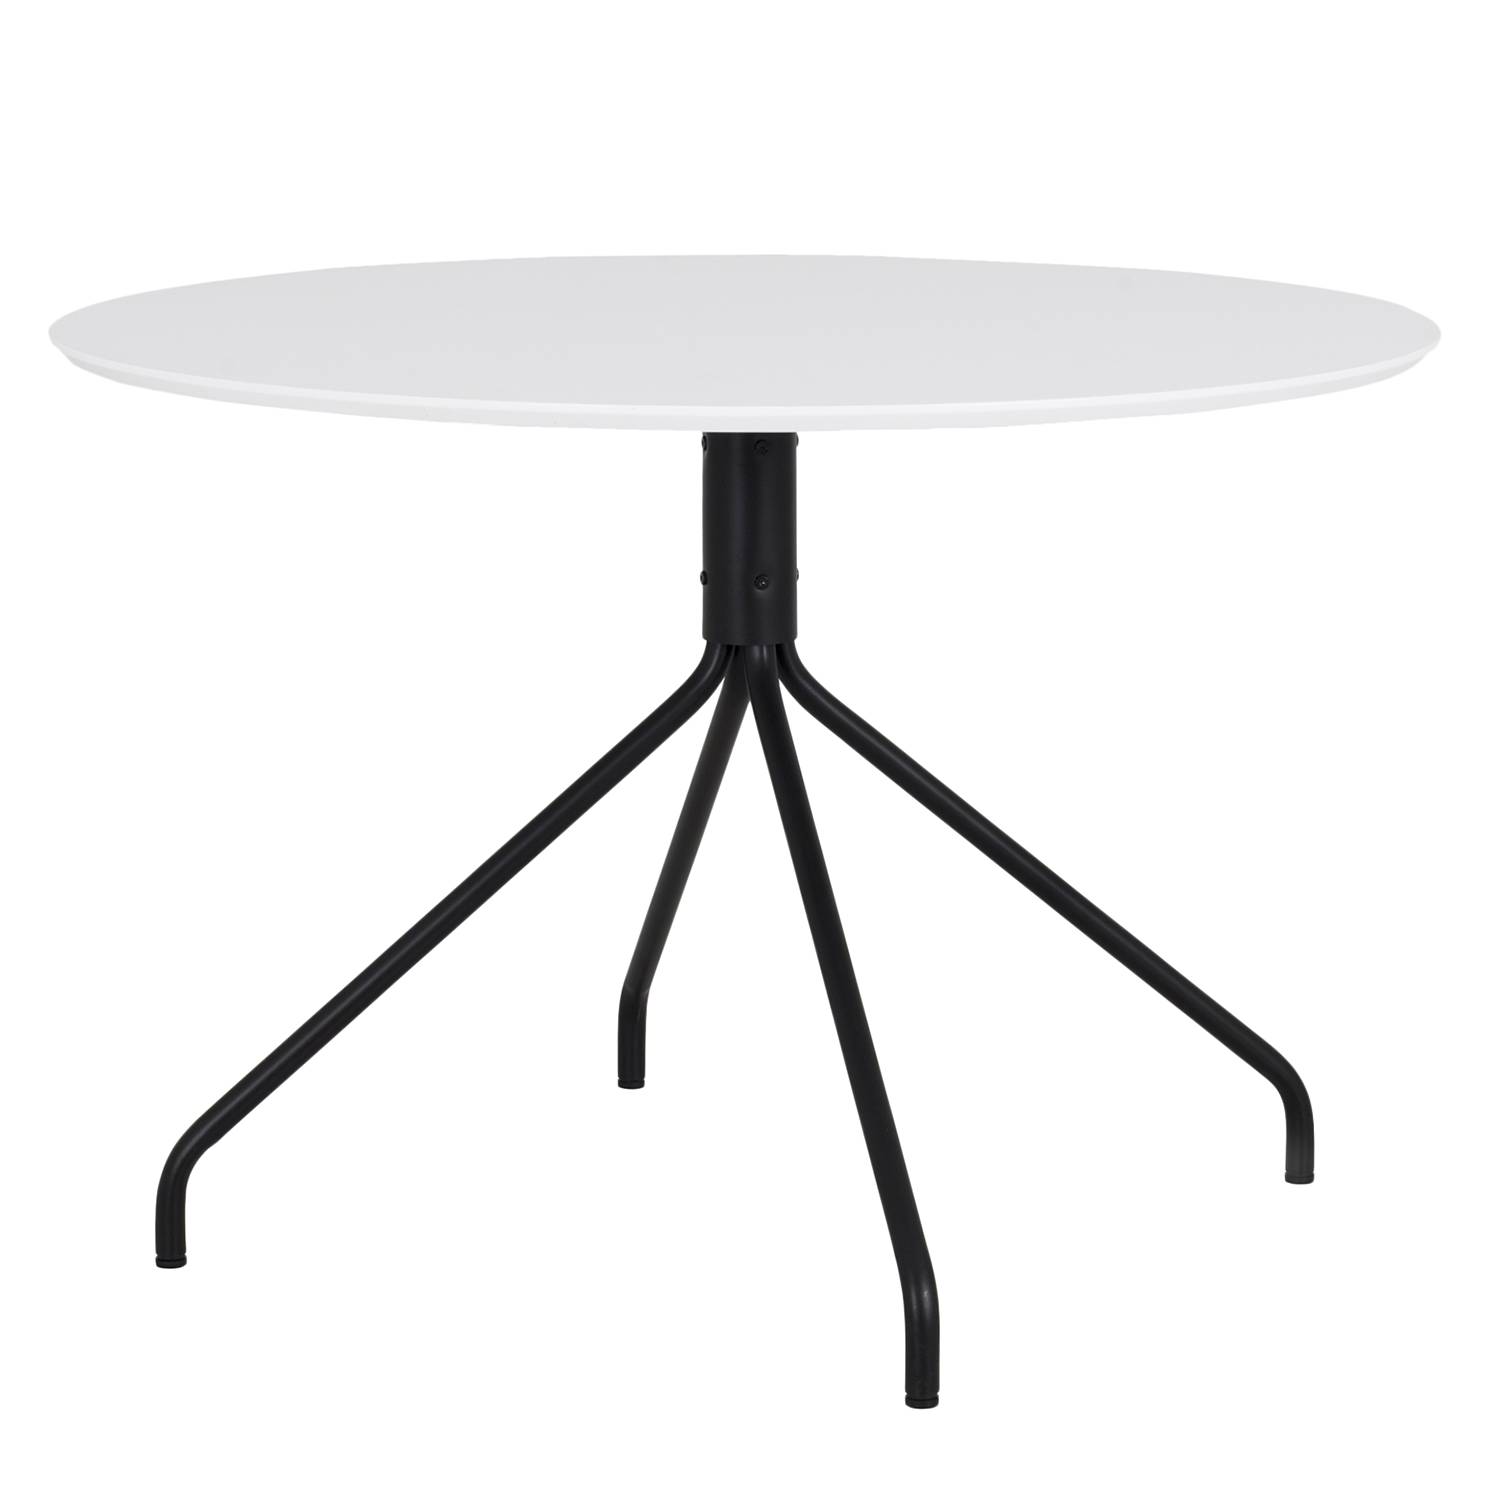 Image of Table Ego 000000001000144197